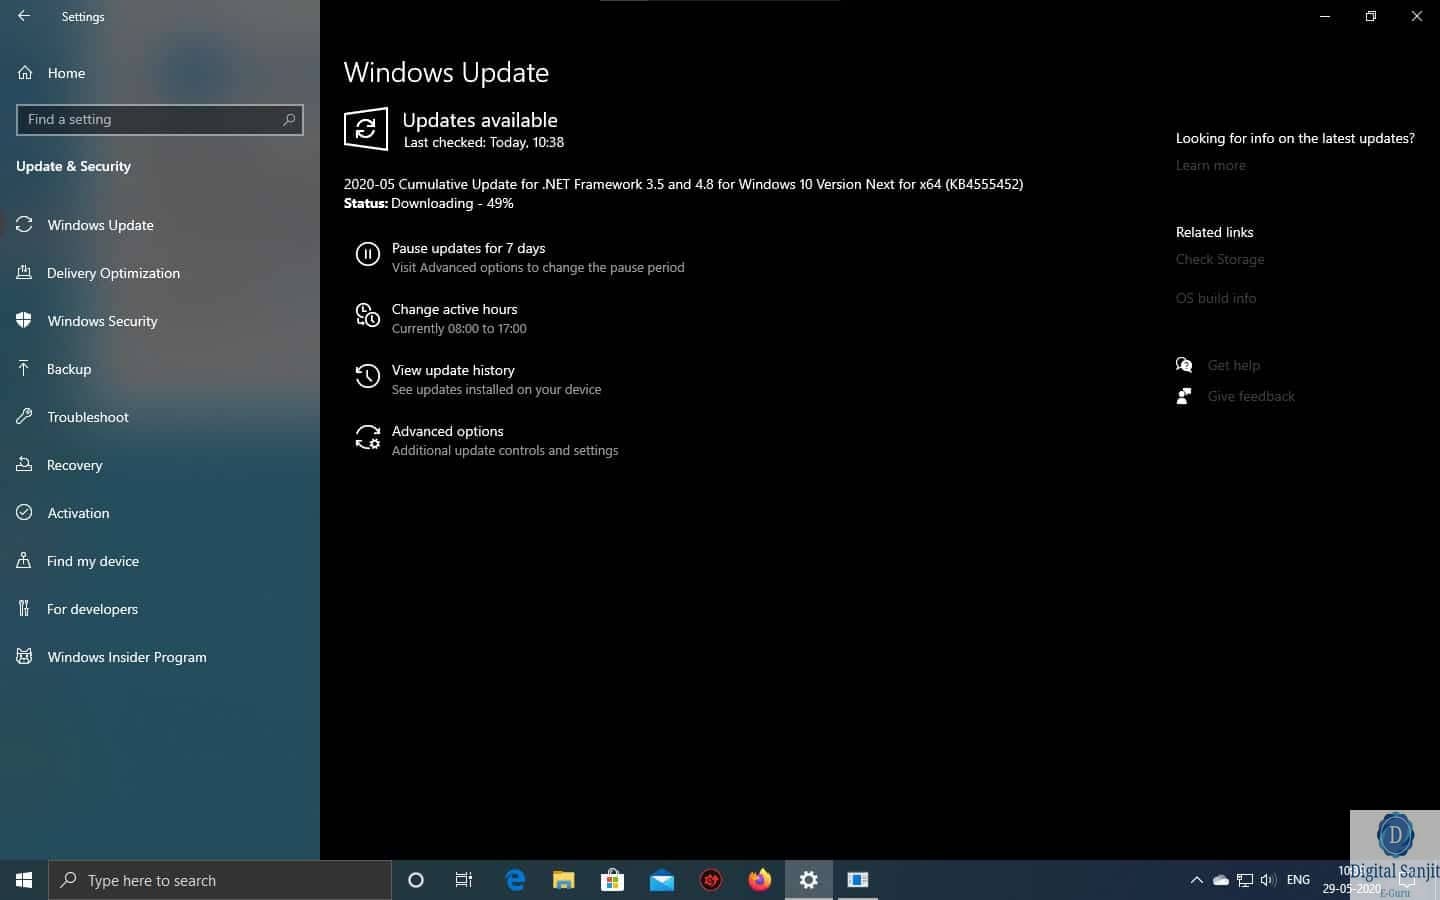 Cumulative-Update-for-.NET-Framework-3.5-and-4.8-for-Windows-10-Version-Next-for-x64-KB4555452-3-1-1